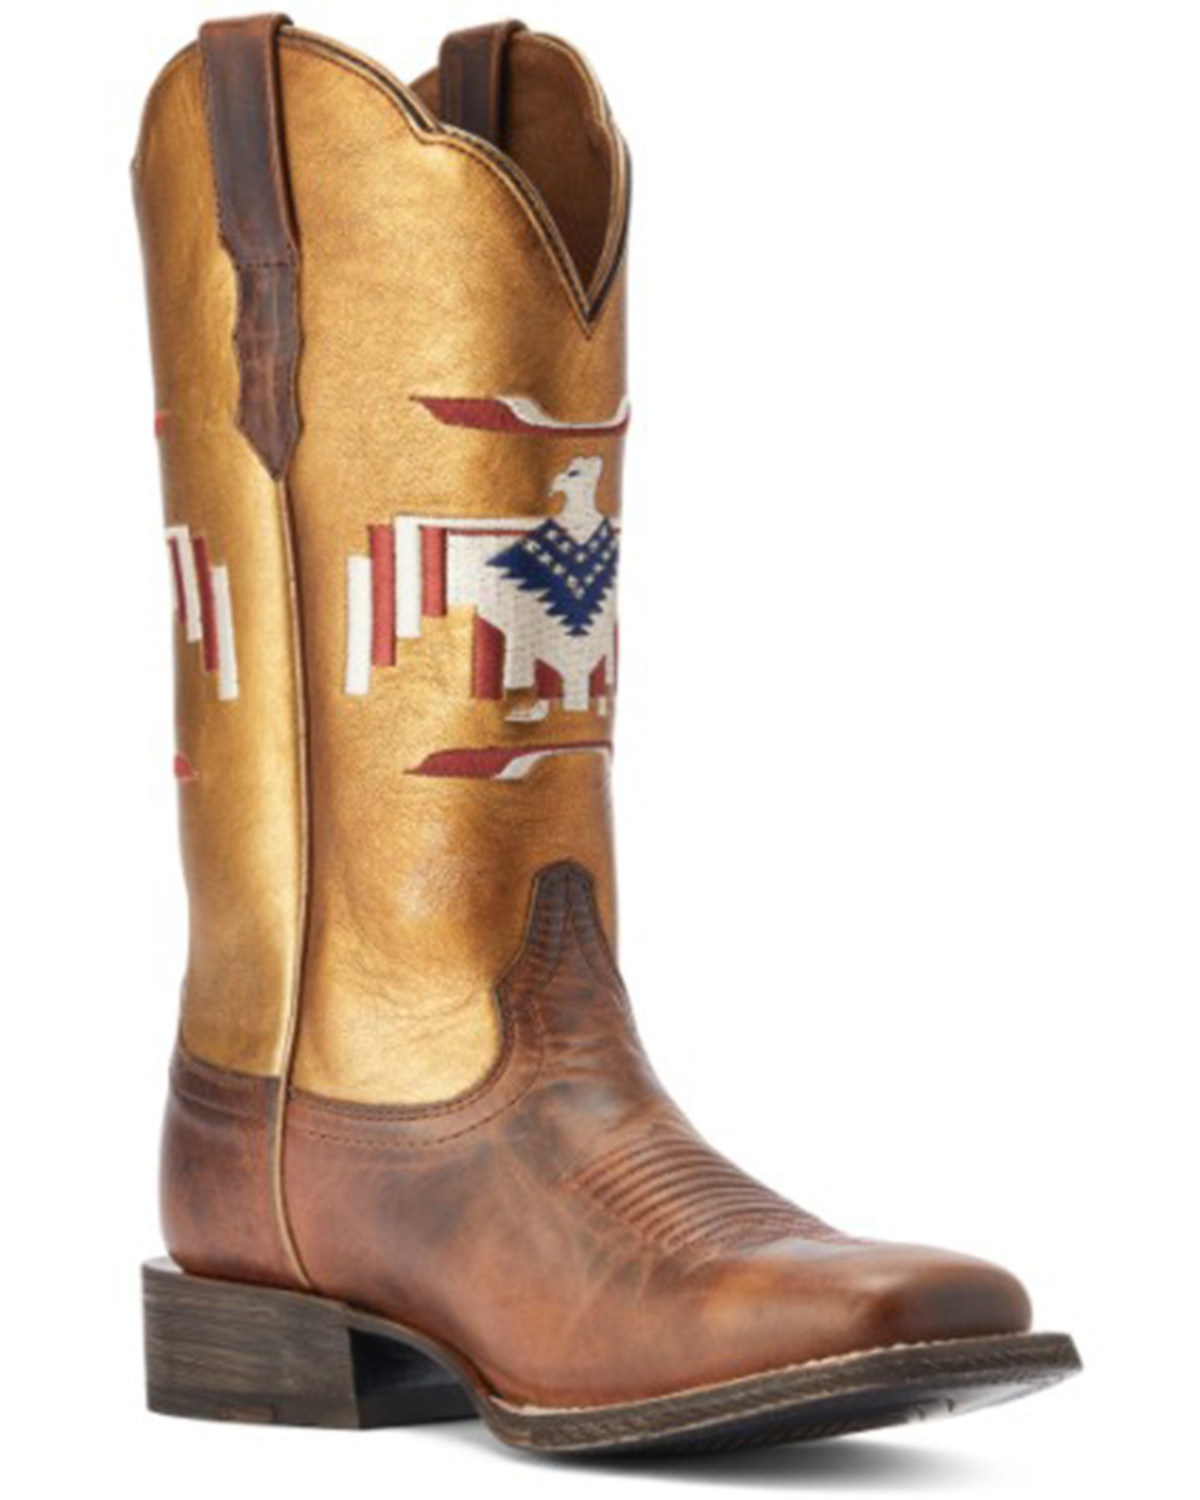 Ariat Women's Frontier Chimayo Thunderbird Embroidered Western Boots - Broad Square Toe